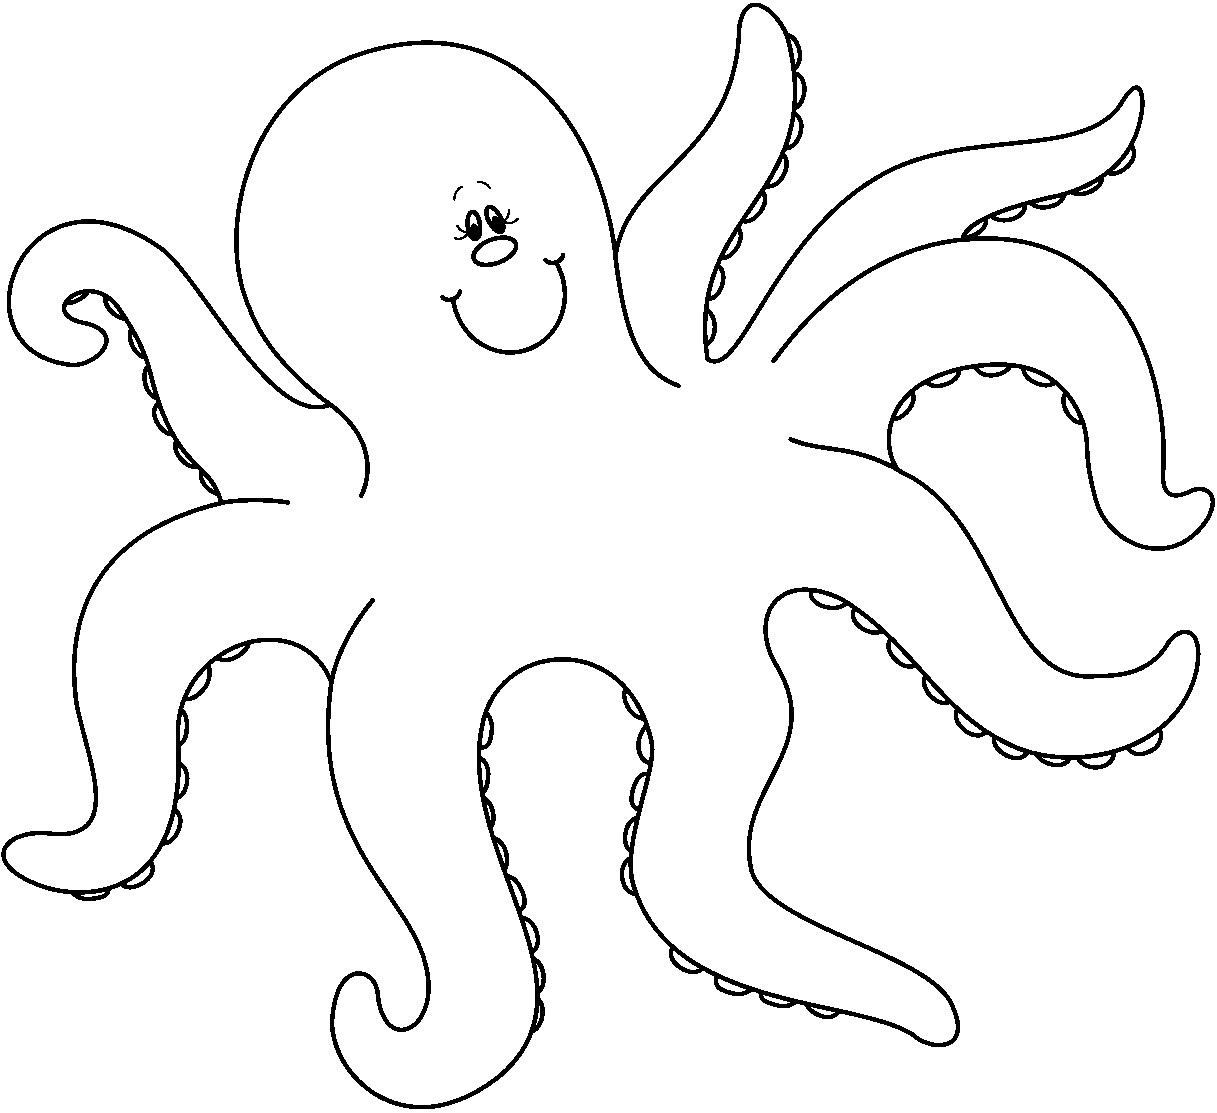 Cute octopus clipart black and white 